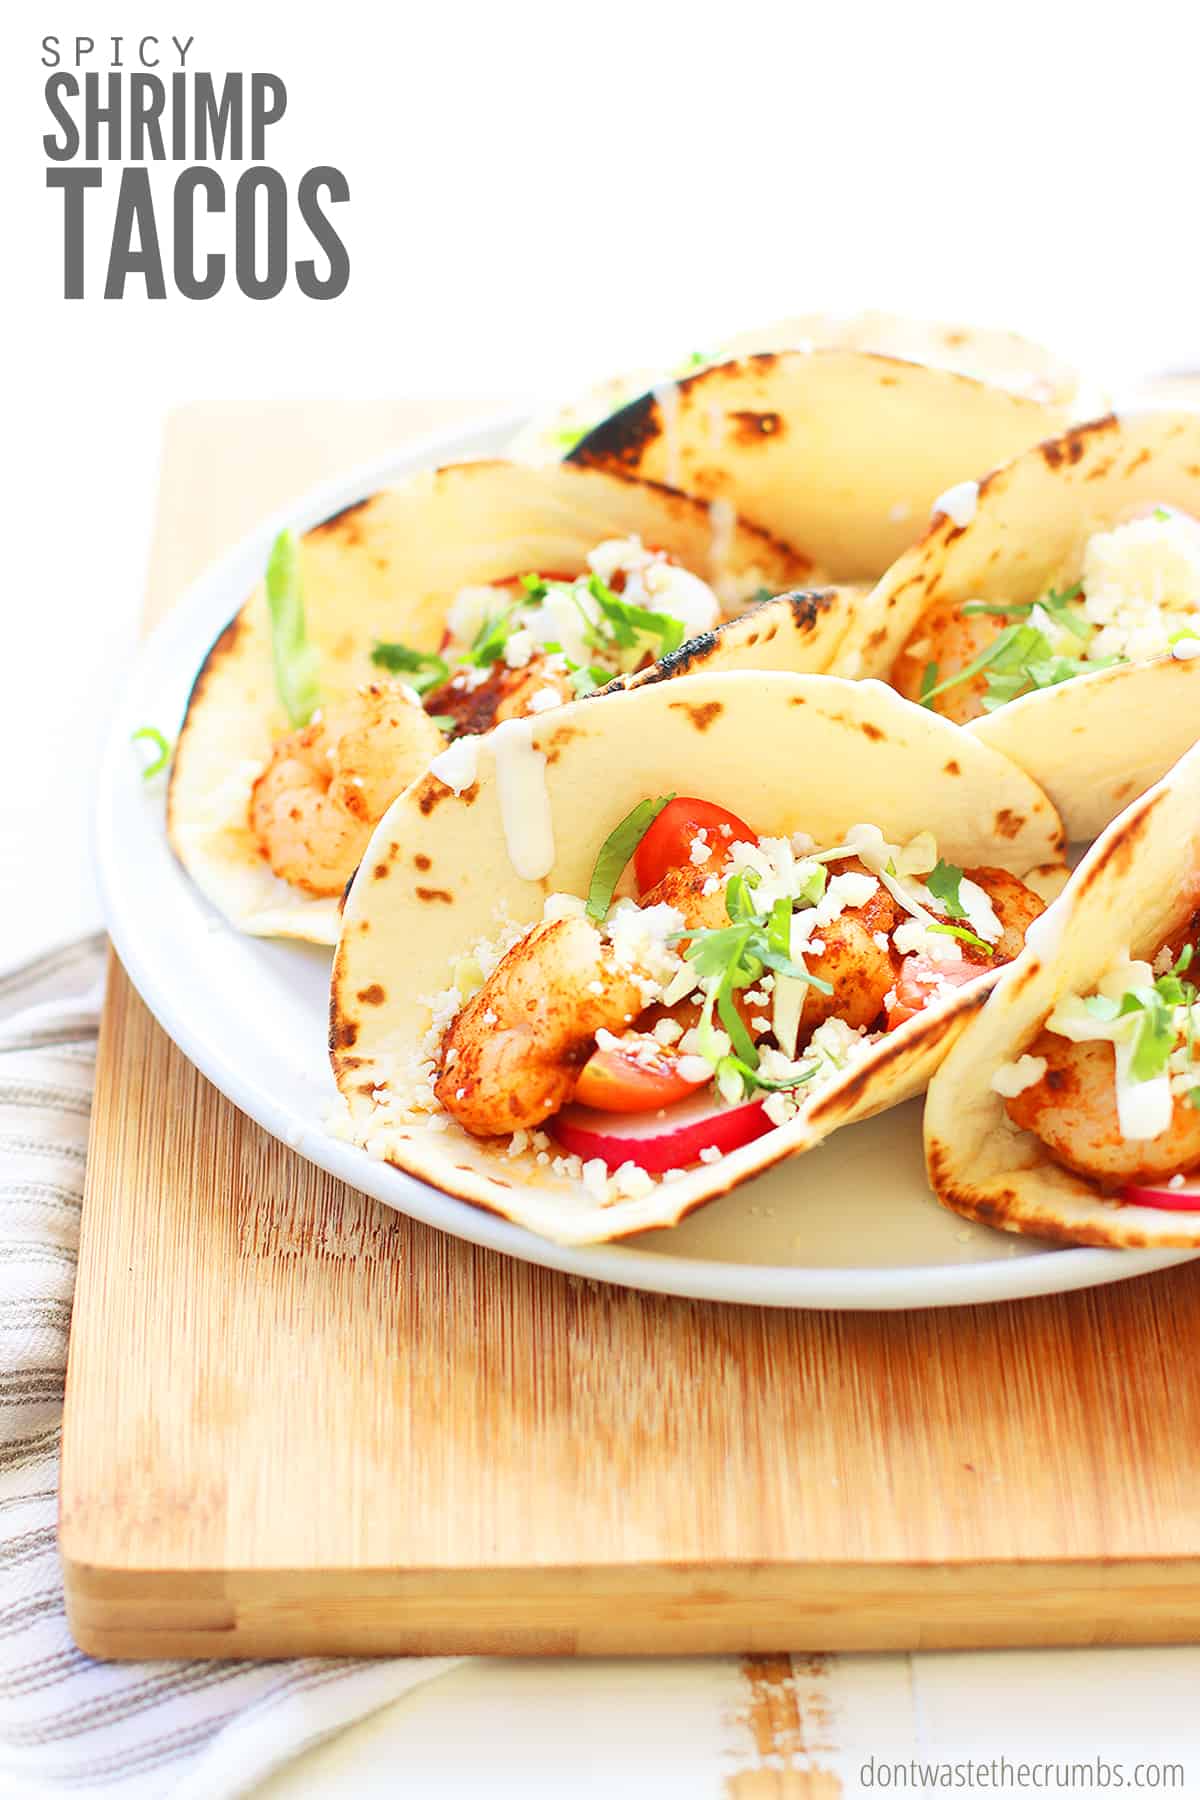 Spicy shrimp tacos and creamy slaw tucked into flour tortillas are loaded with tangy cotija, creamy avocado, and juicy mango salsa in this easy shrimp tacos recipe! Ready in under 30 minutes!